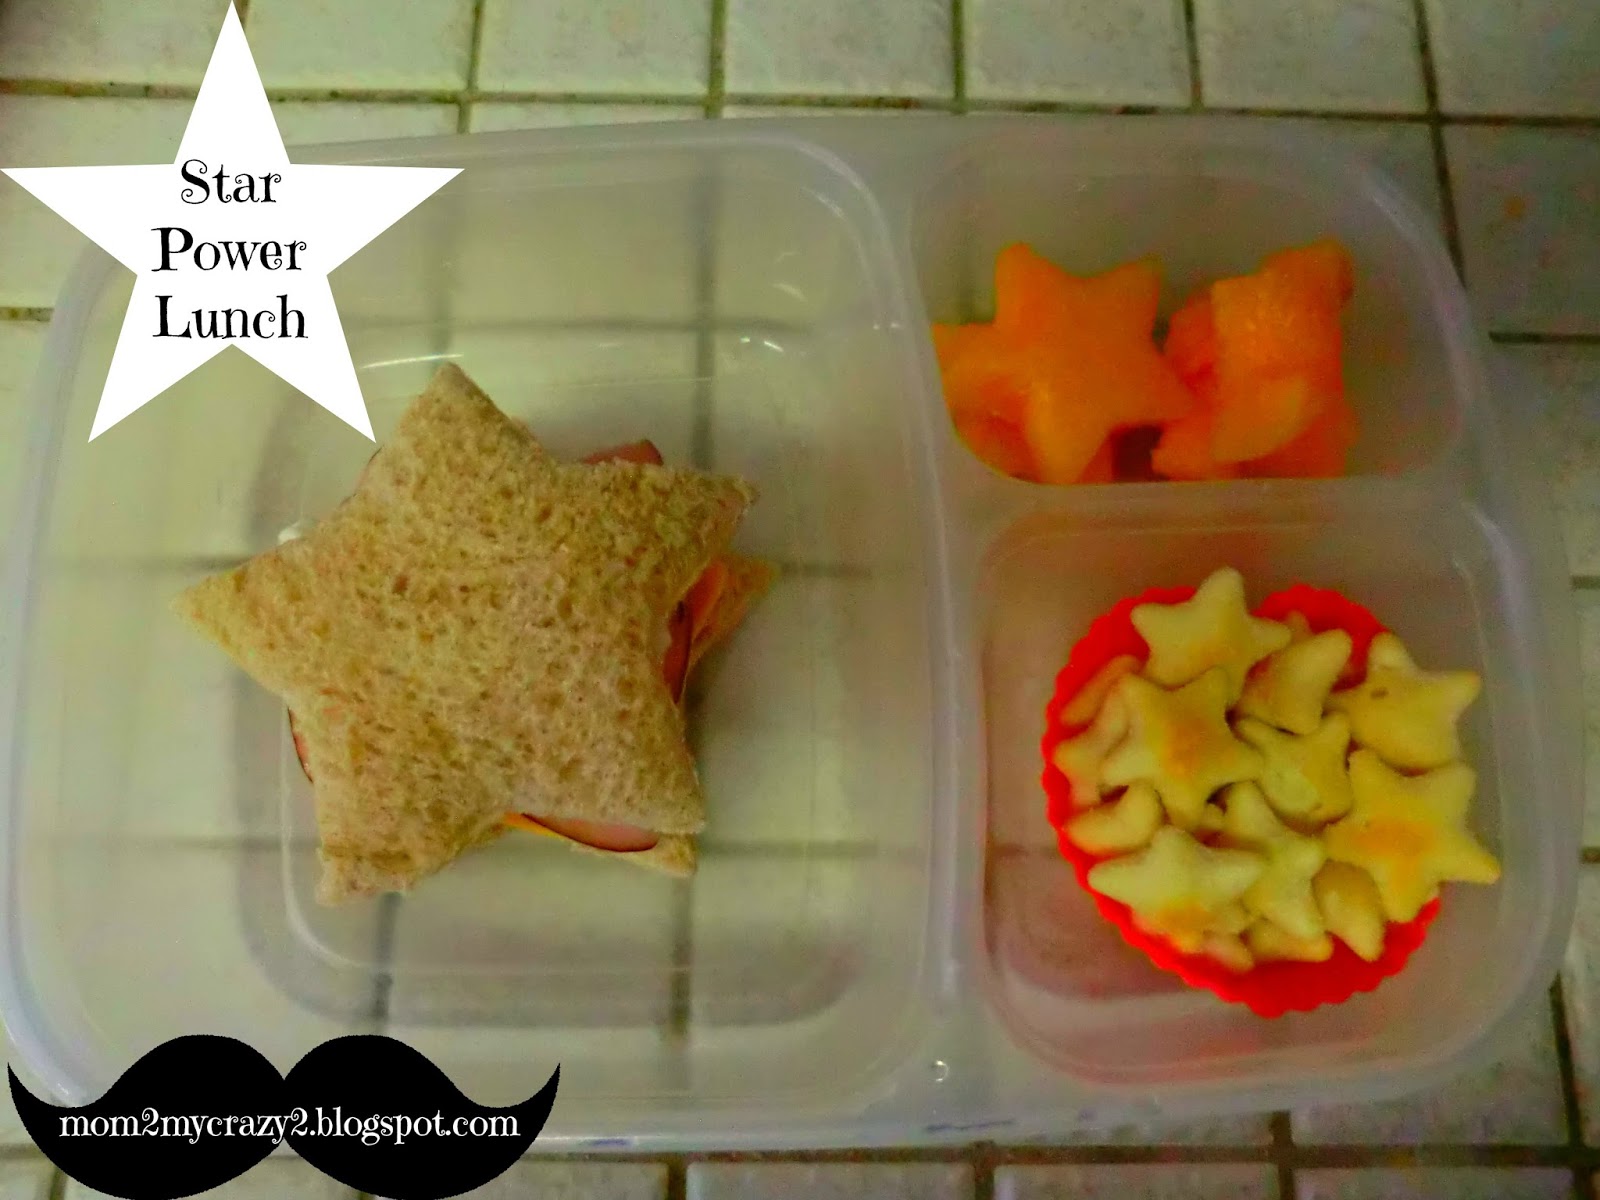 Running away? I'll help you pack.: Hit of Lunchroom ... Star Power Lunch